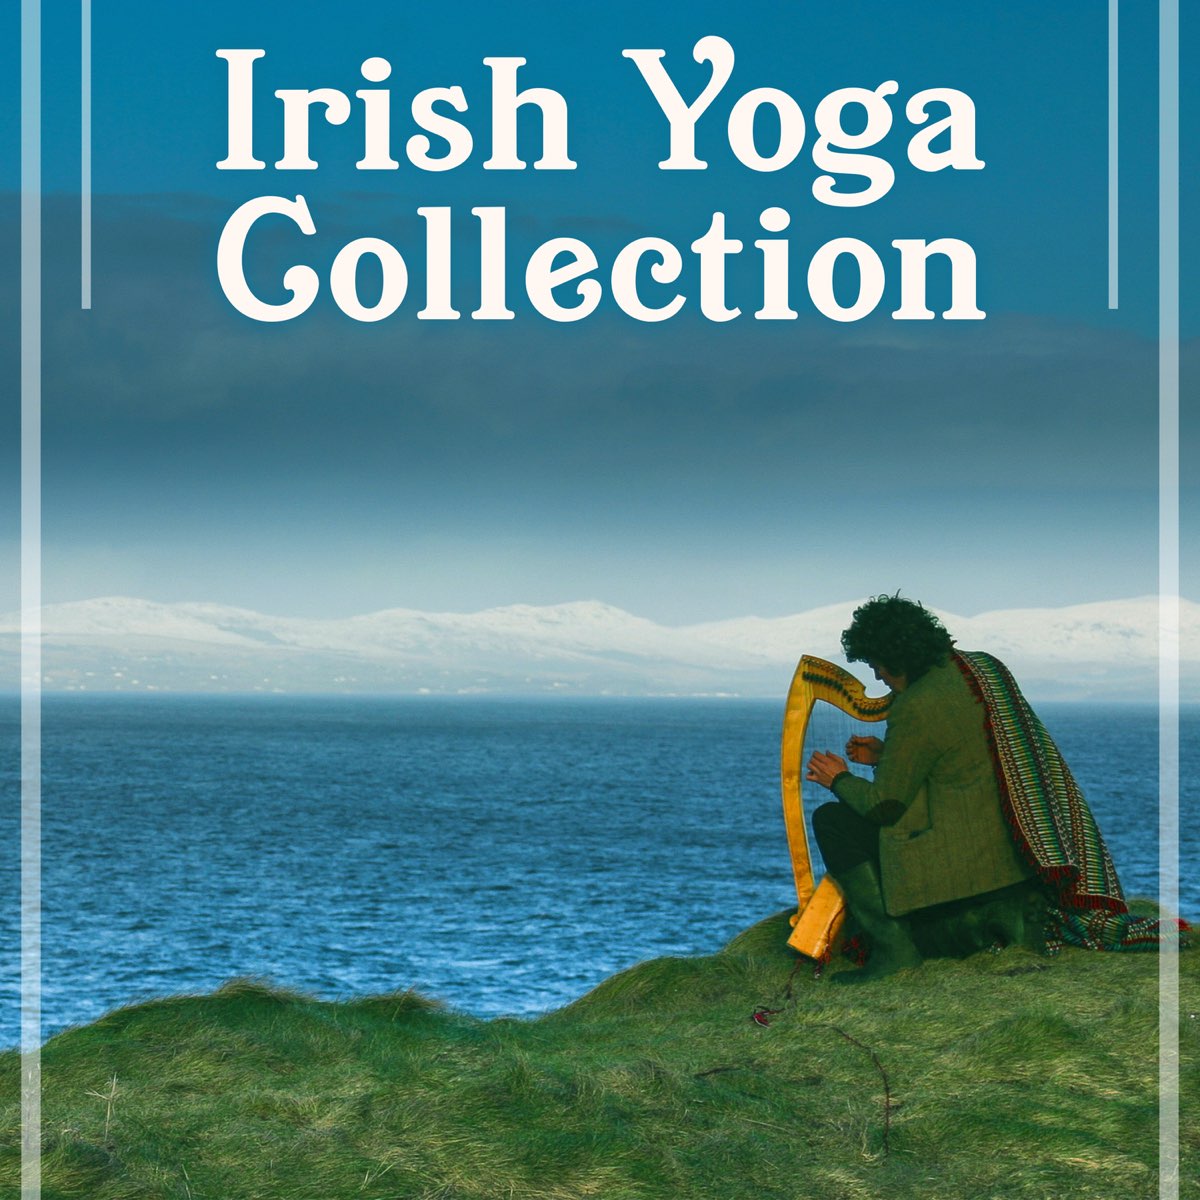 Irish Yoga Collection – Soft Relaxing Music, Flute and Harp